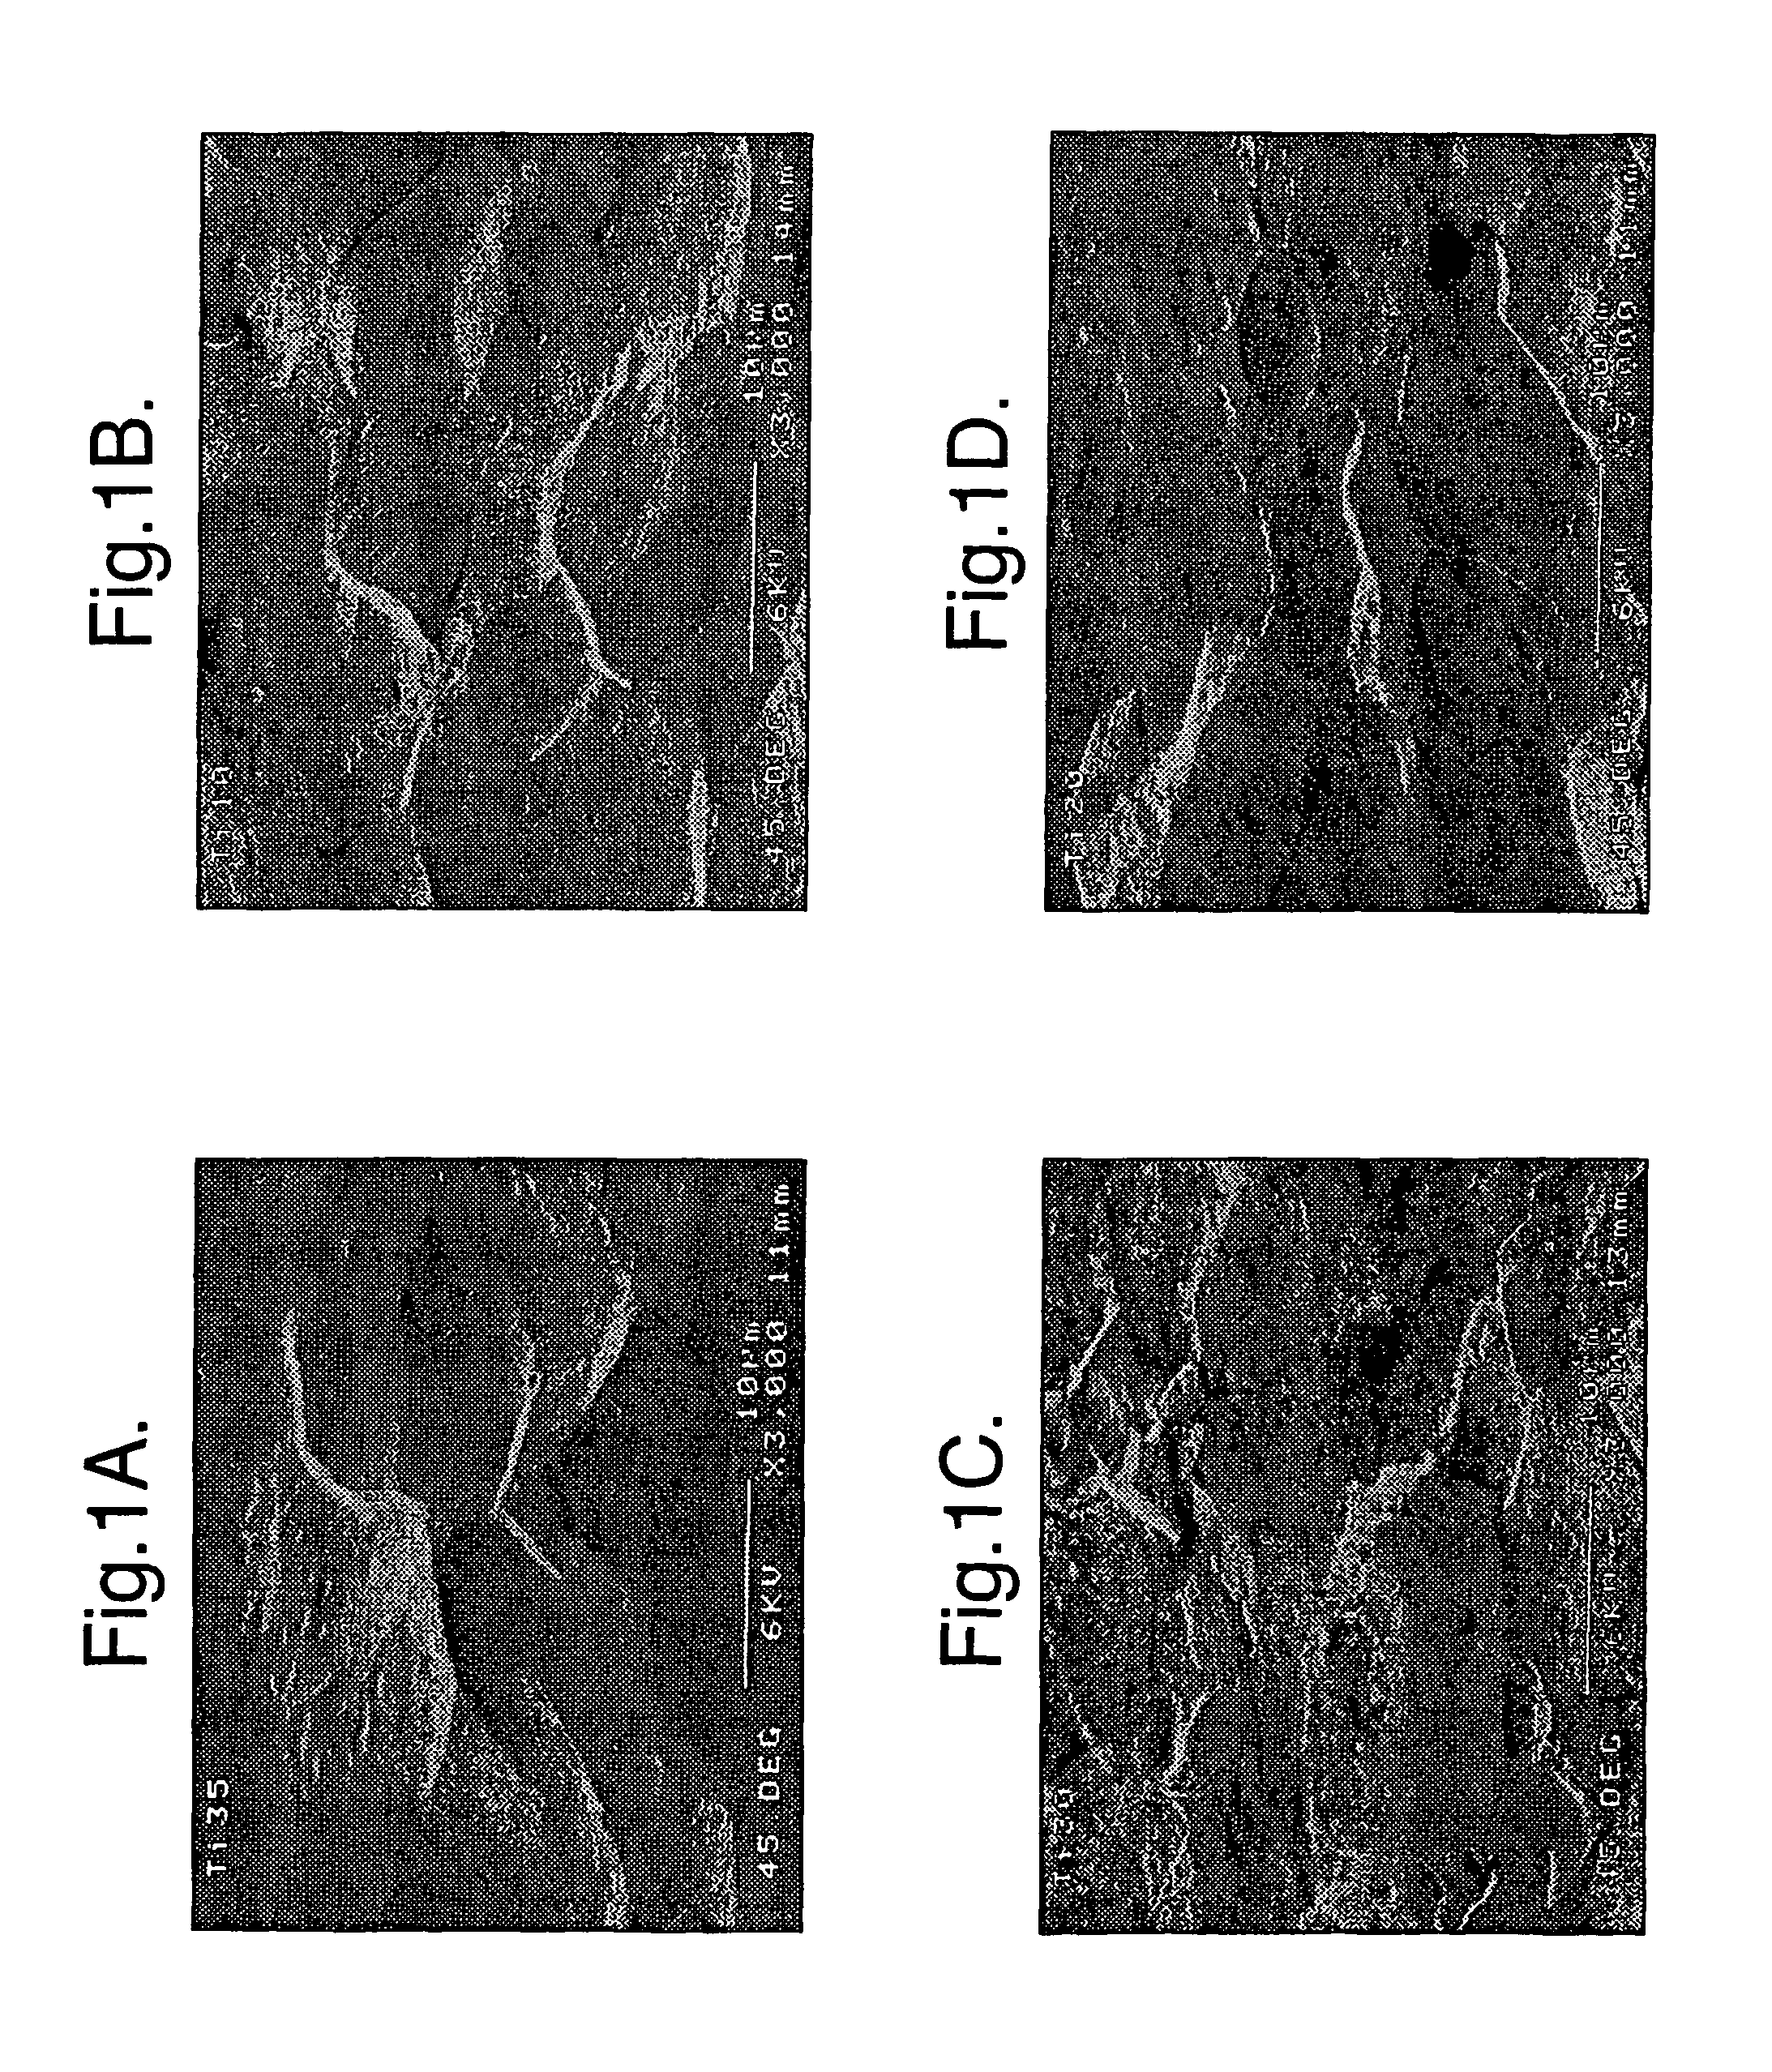 Implants for administering substances and methods of producing implants